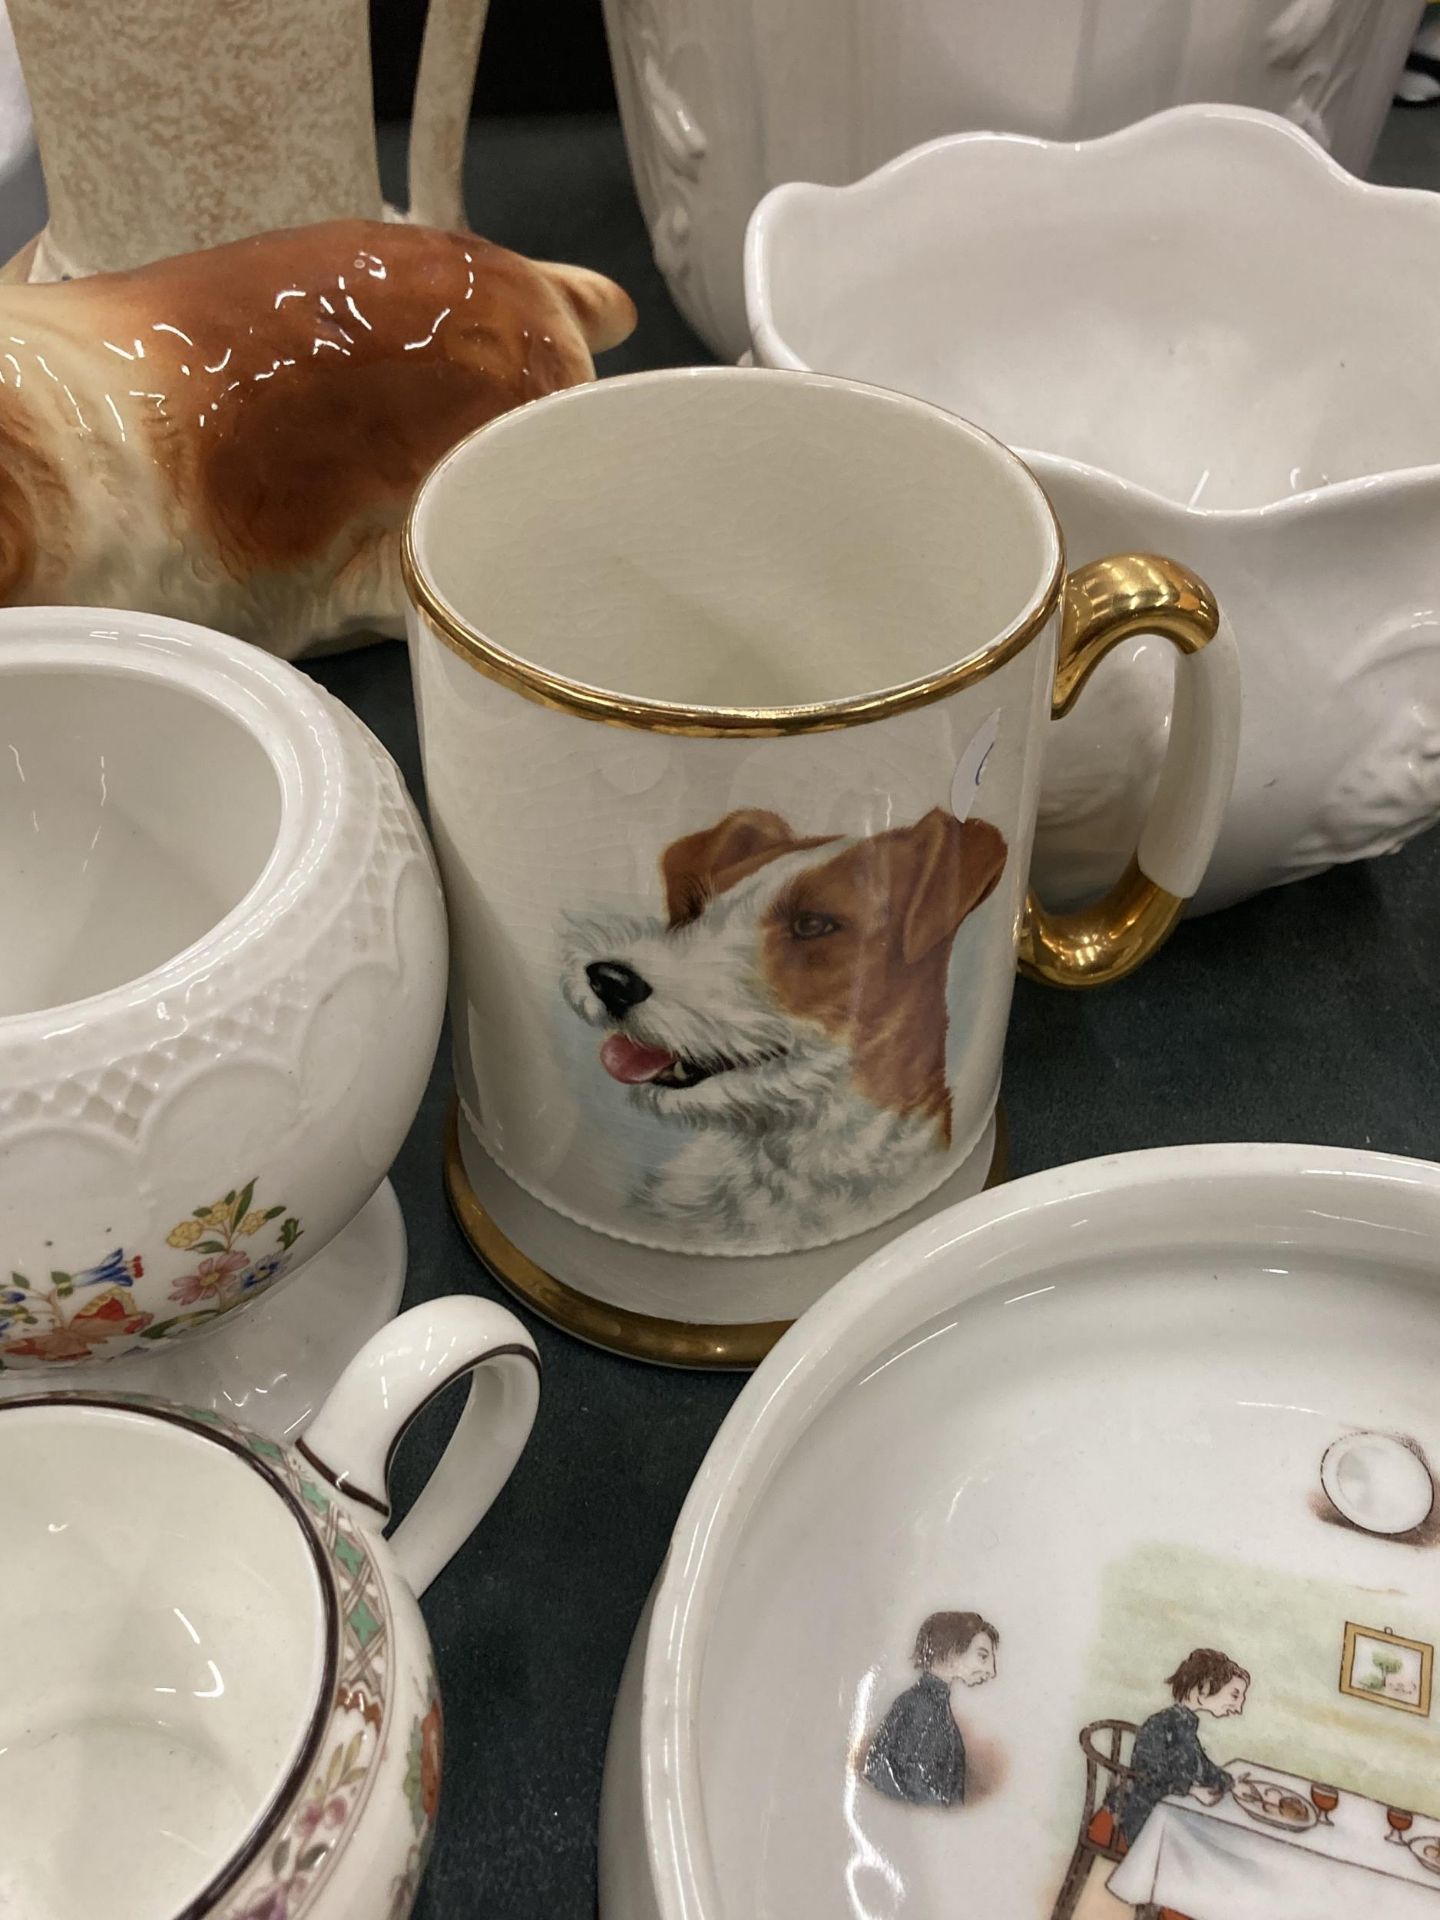 A LARGE QUANTITY OF CERAMIC ITEMS TO INCLUDE A SPANIEL DOG, JUGS, PLANTERS, BOWLS, A TANKARD, ETC - Image 7 of 9